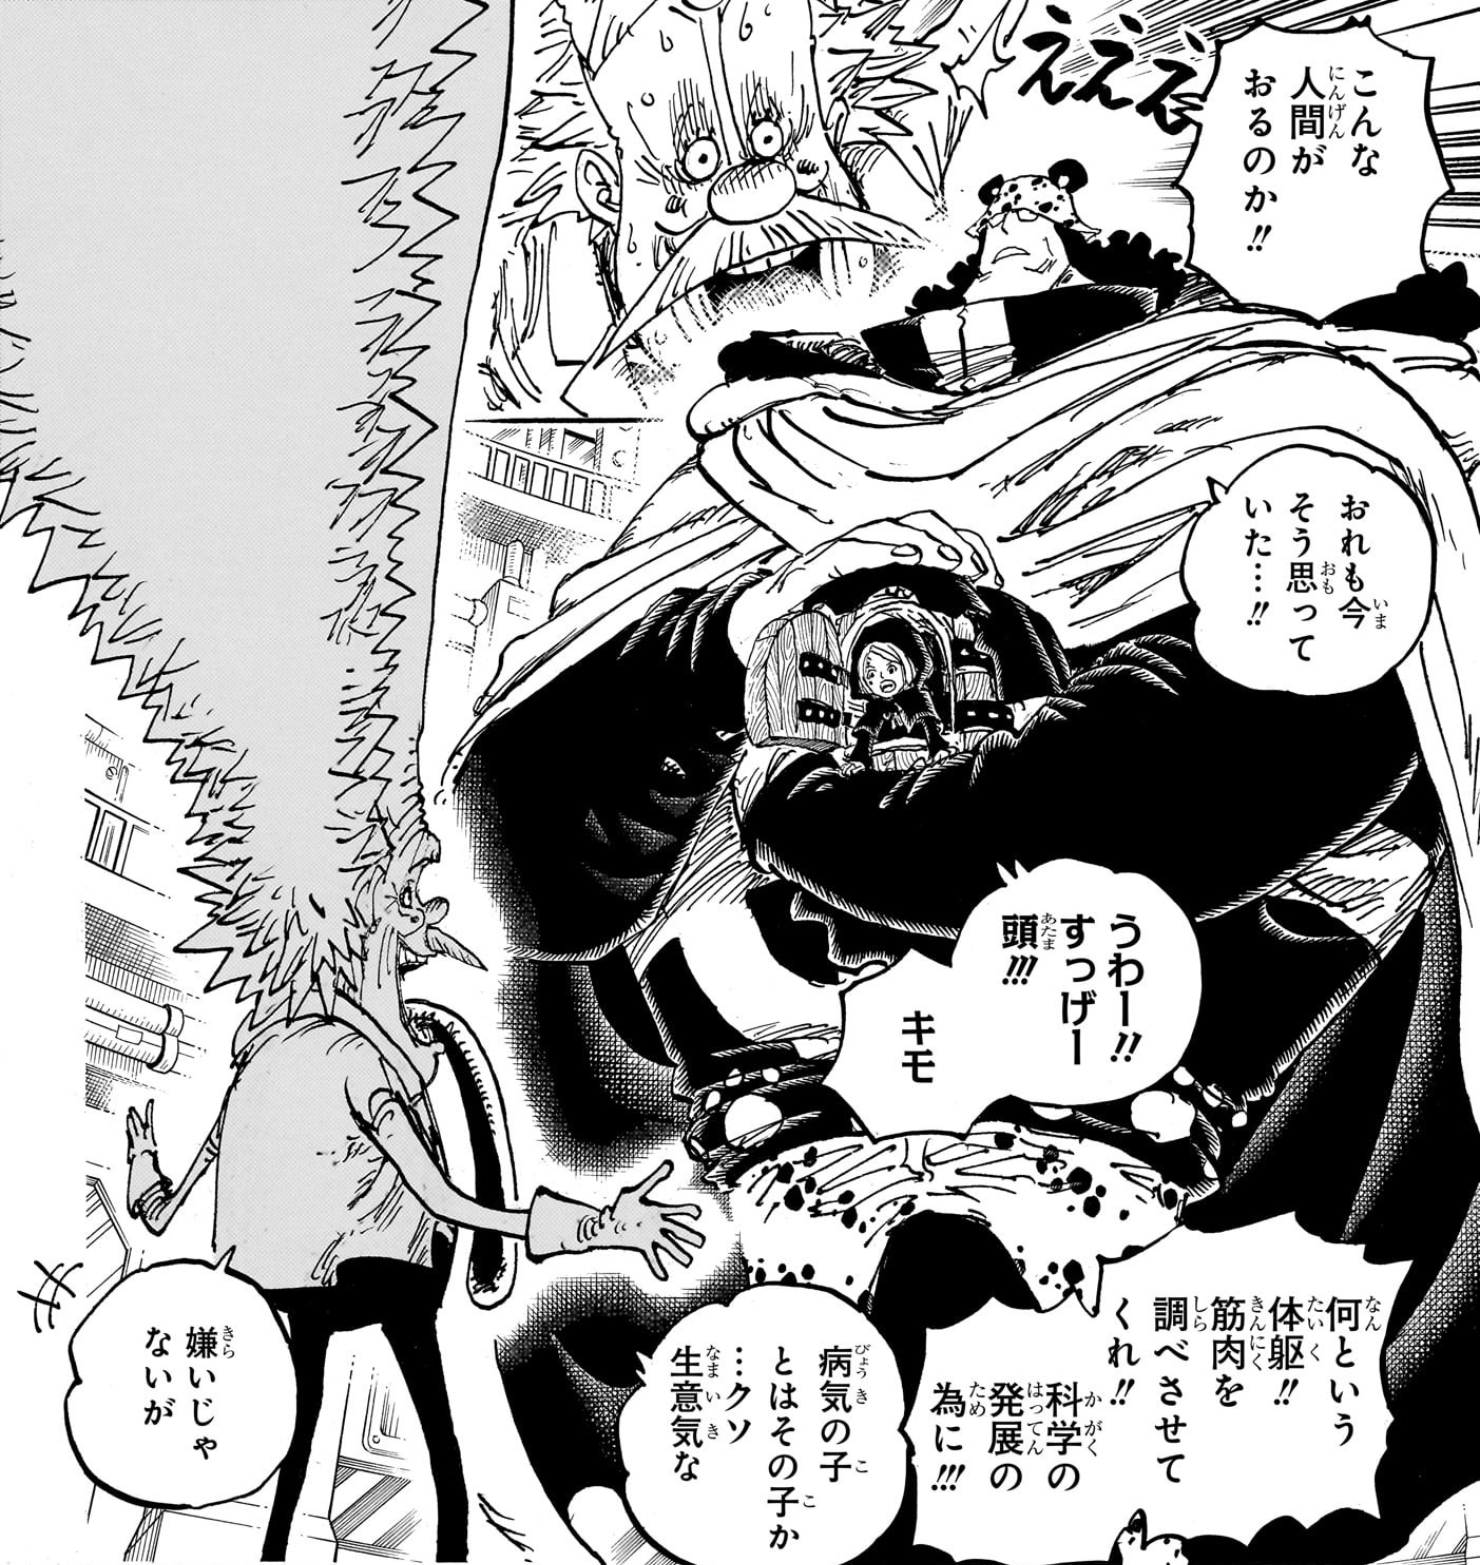 One Piece chapter 1092 spoilers: A major hint about Void Century